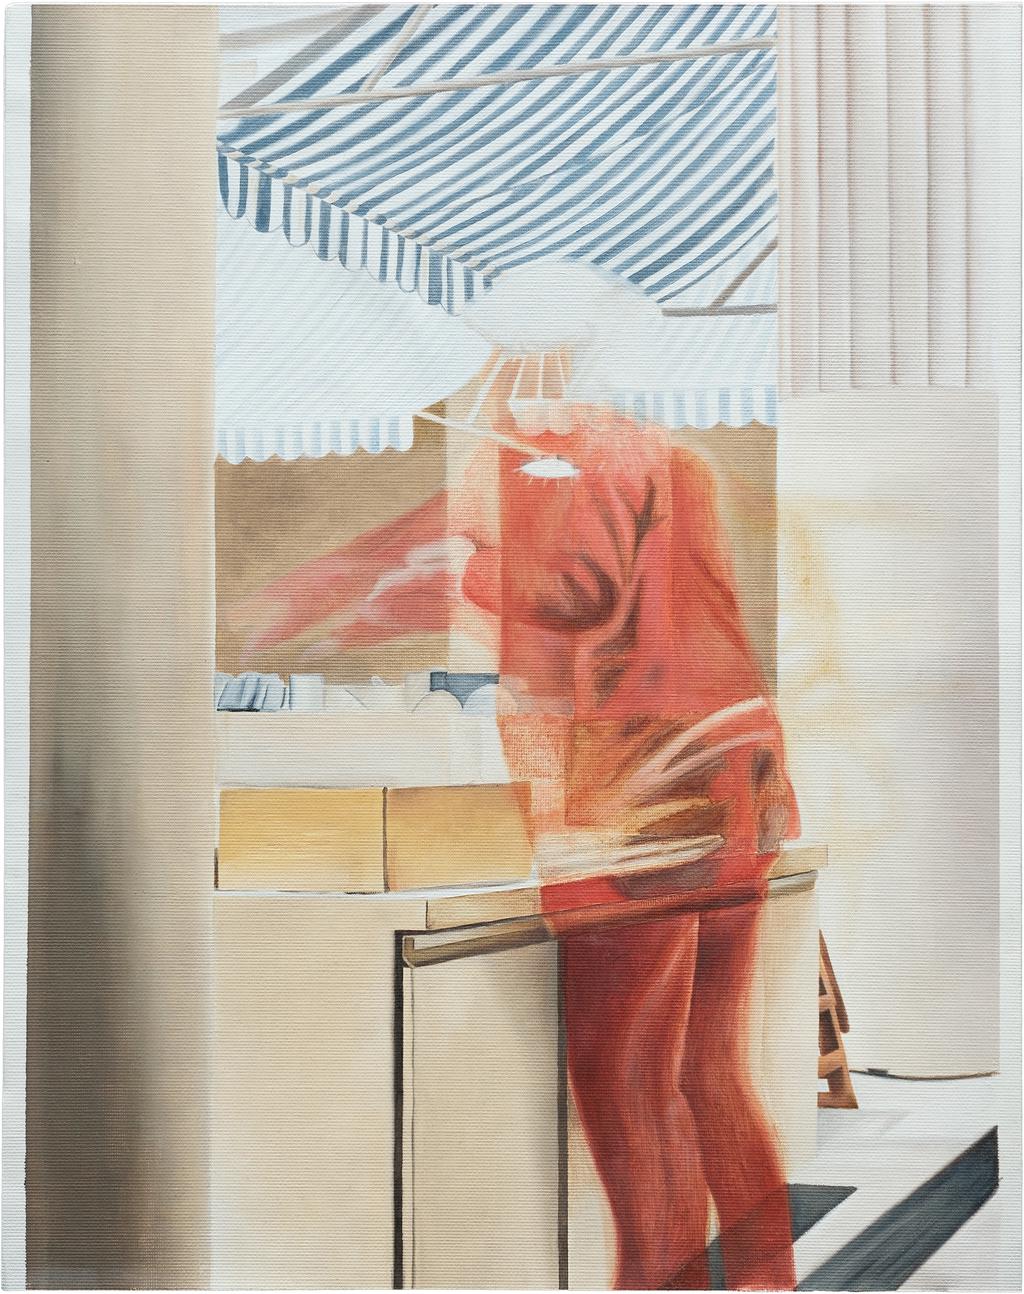 An oil painting of a long exposure photograph of a lady serving herself at the MOMA restaurant in New York.